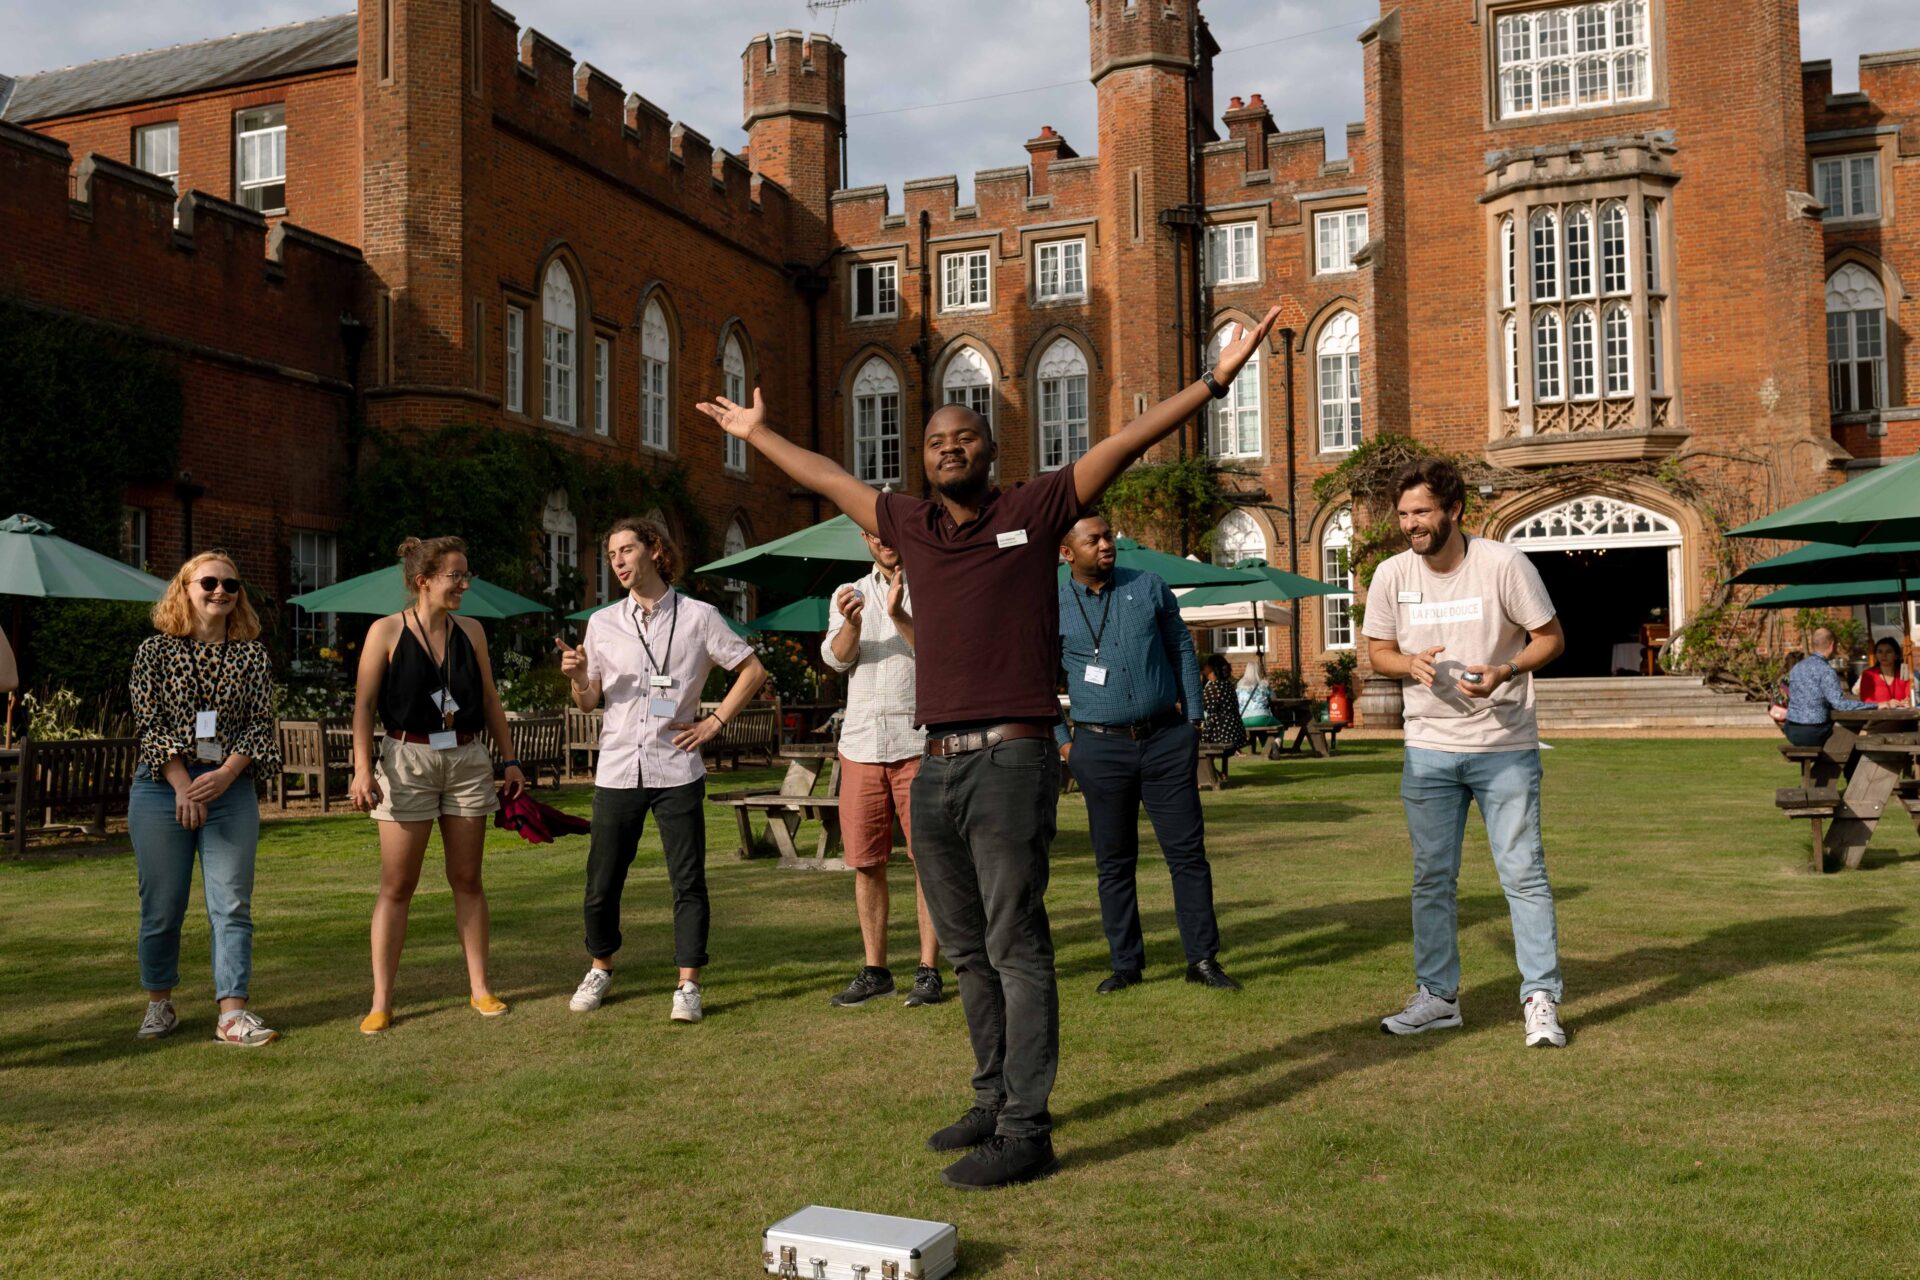 Cumberland Lodge Fellows playing croquet on the lawn